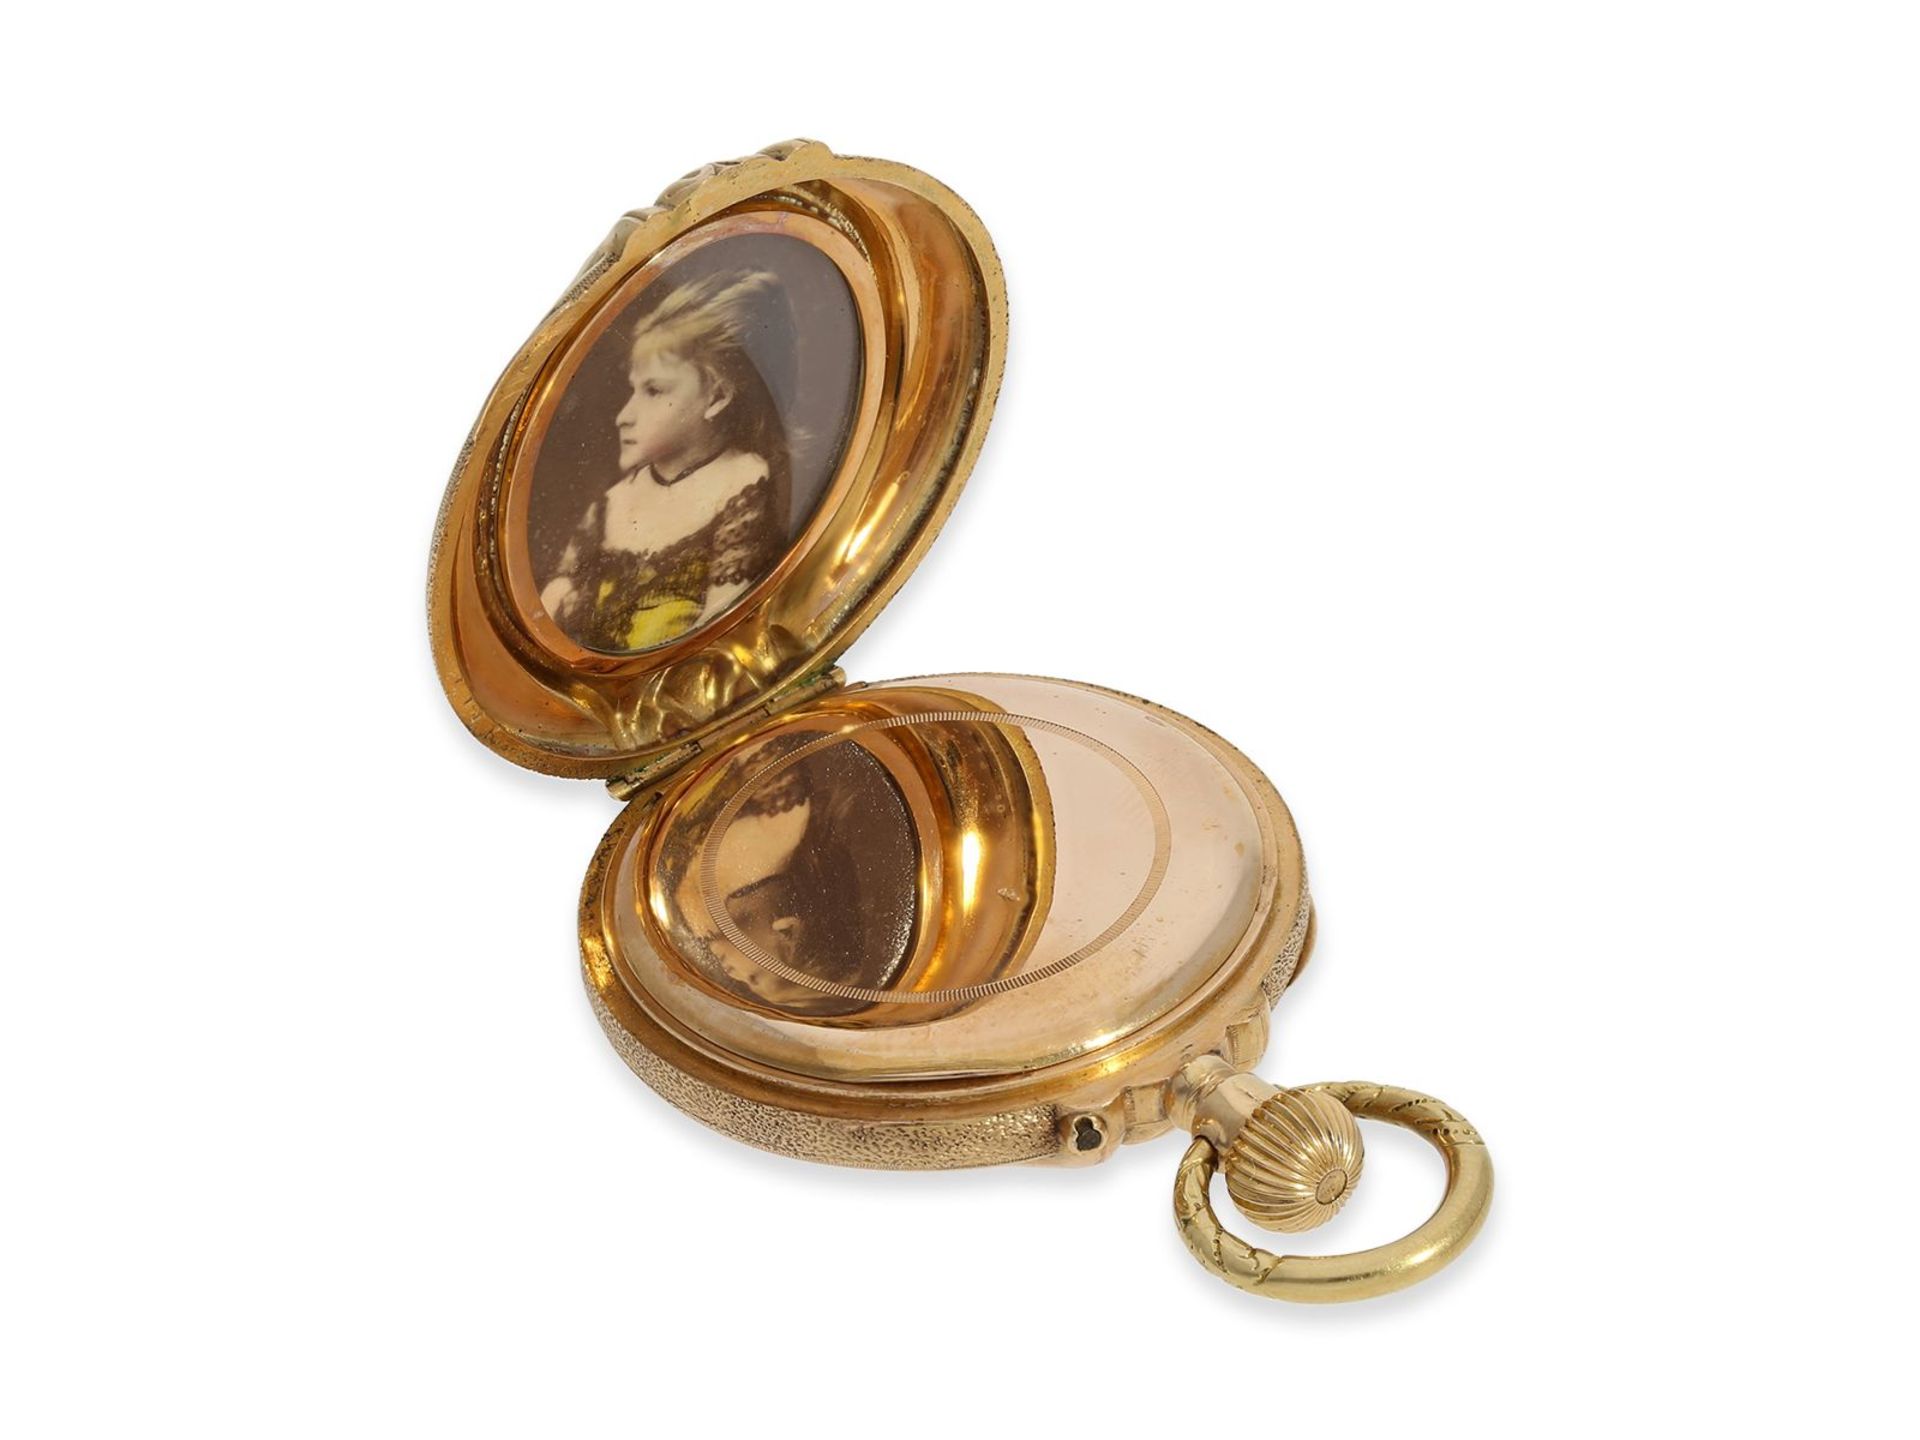 Pocket watch/ form watch: rare gold/ enamel form watch with diamonds, ca. 1880 - Image 4 of 4